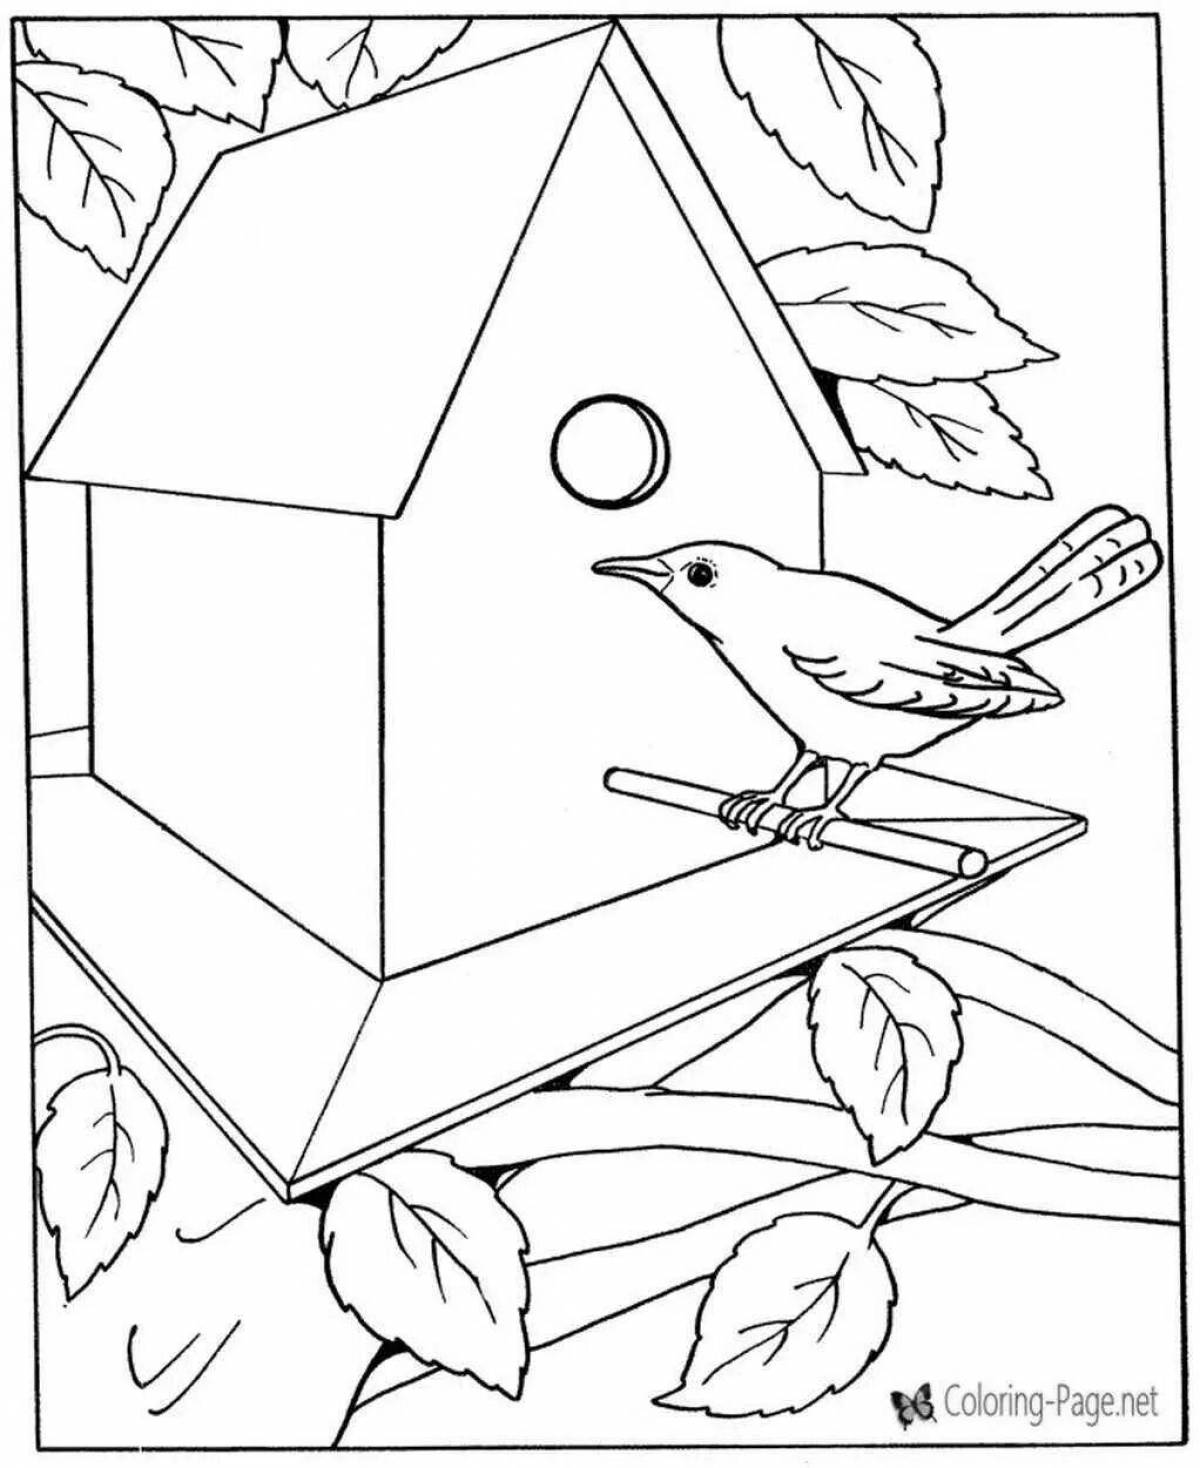 A fun bird feeder coloring book for 3-4 year olds